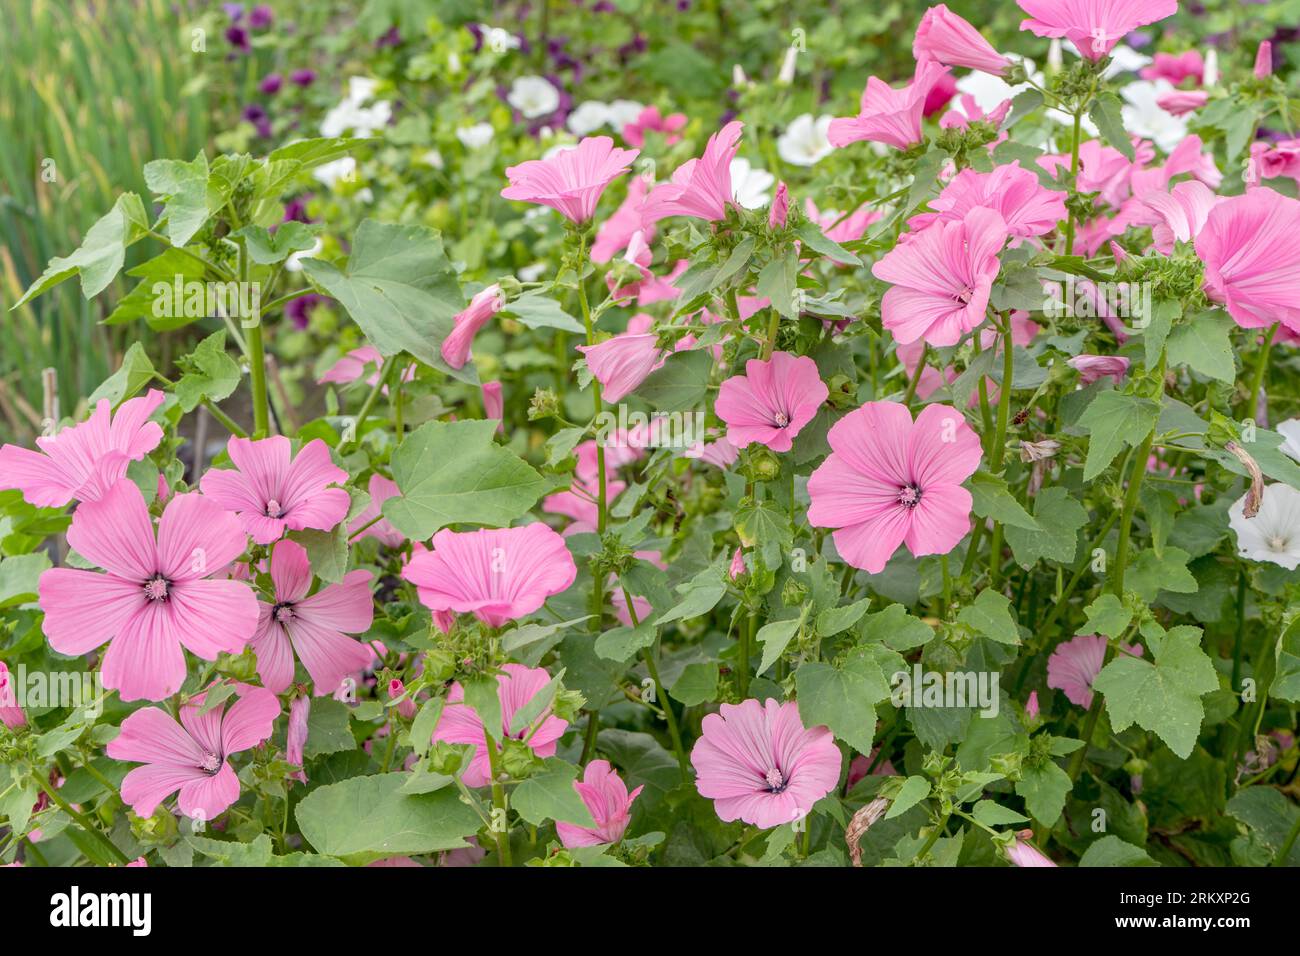 Detail shot of pink flowering mallow plants in the garden Stock Photo